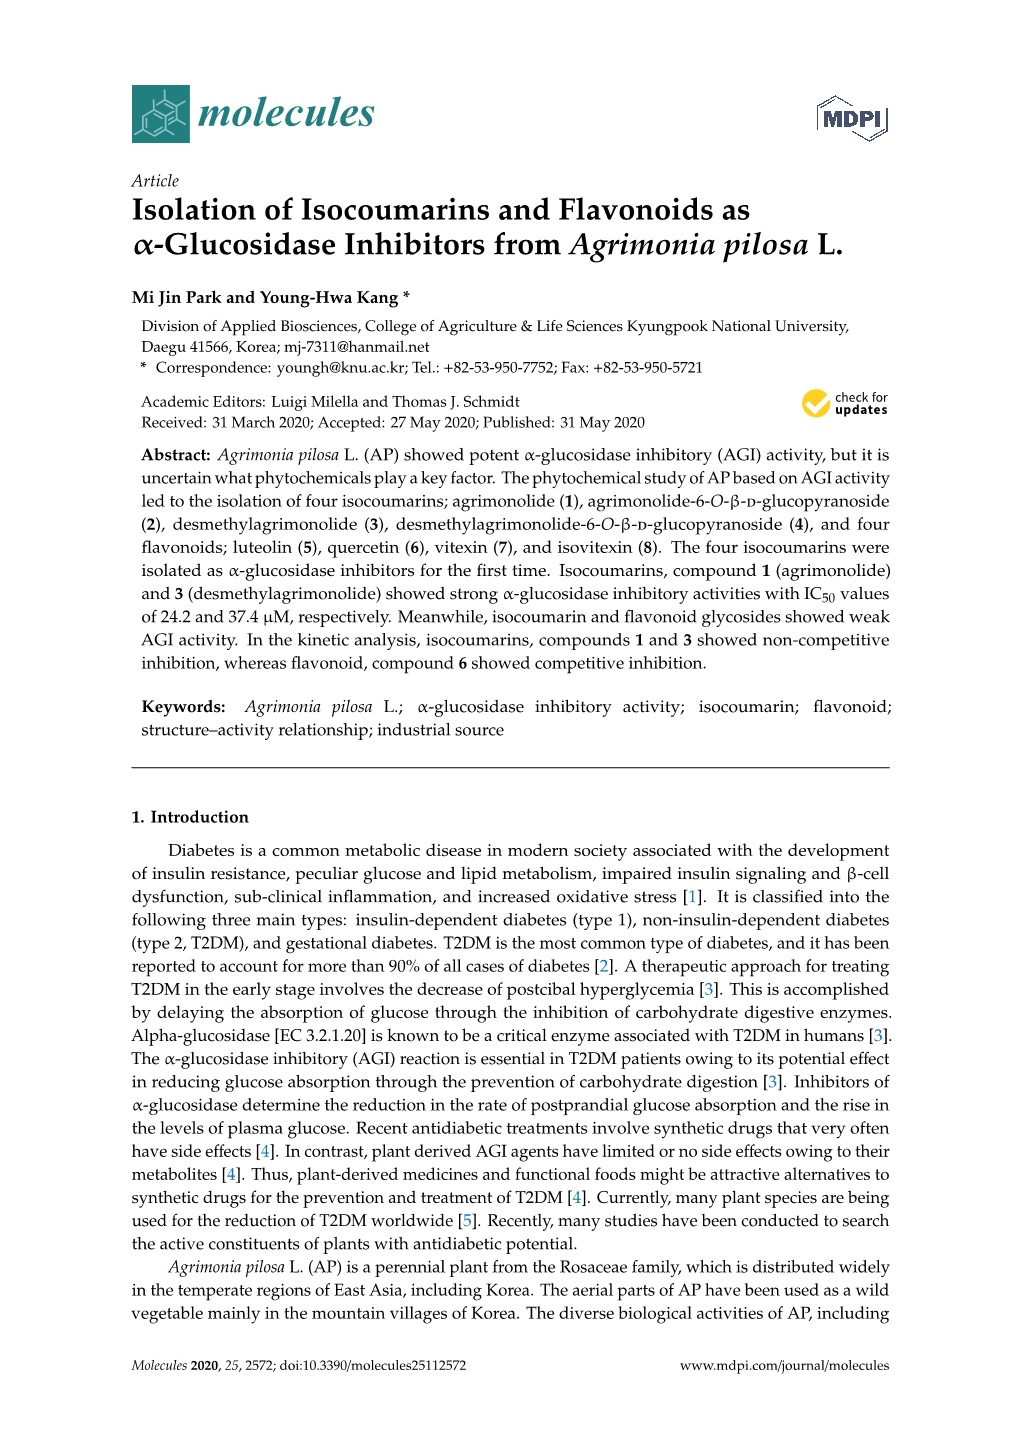 Isolation of Isocoumarins and Flavonoids As Α-Glucosidase Inhibitors from Agrimonia Pilosa L